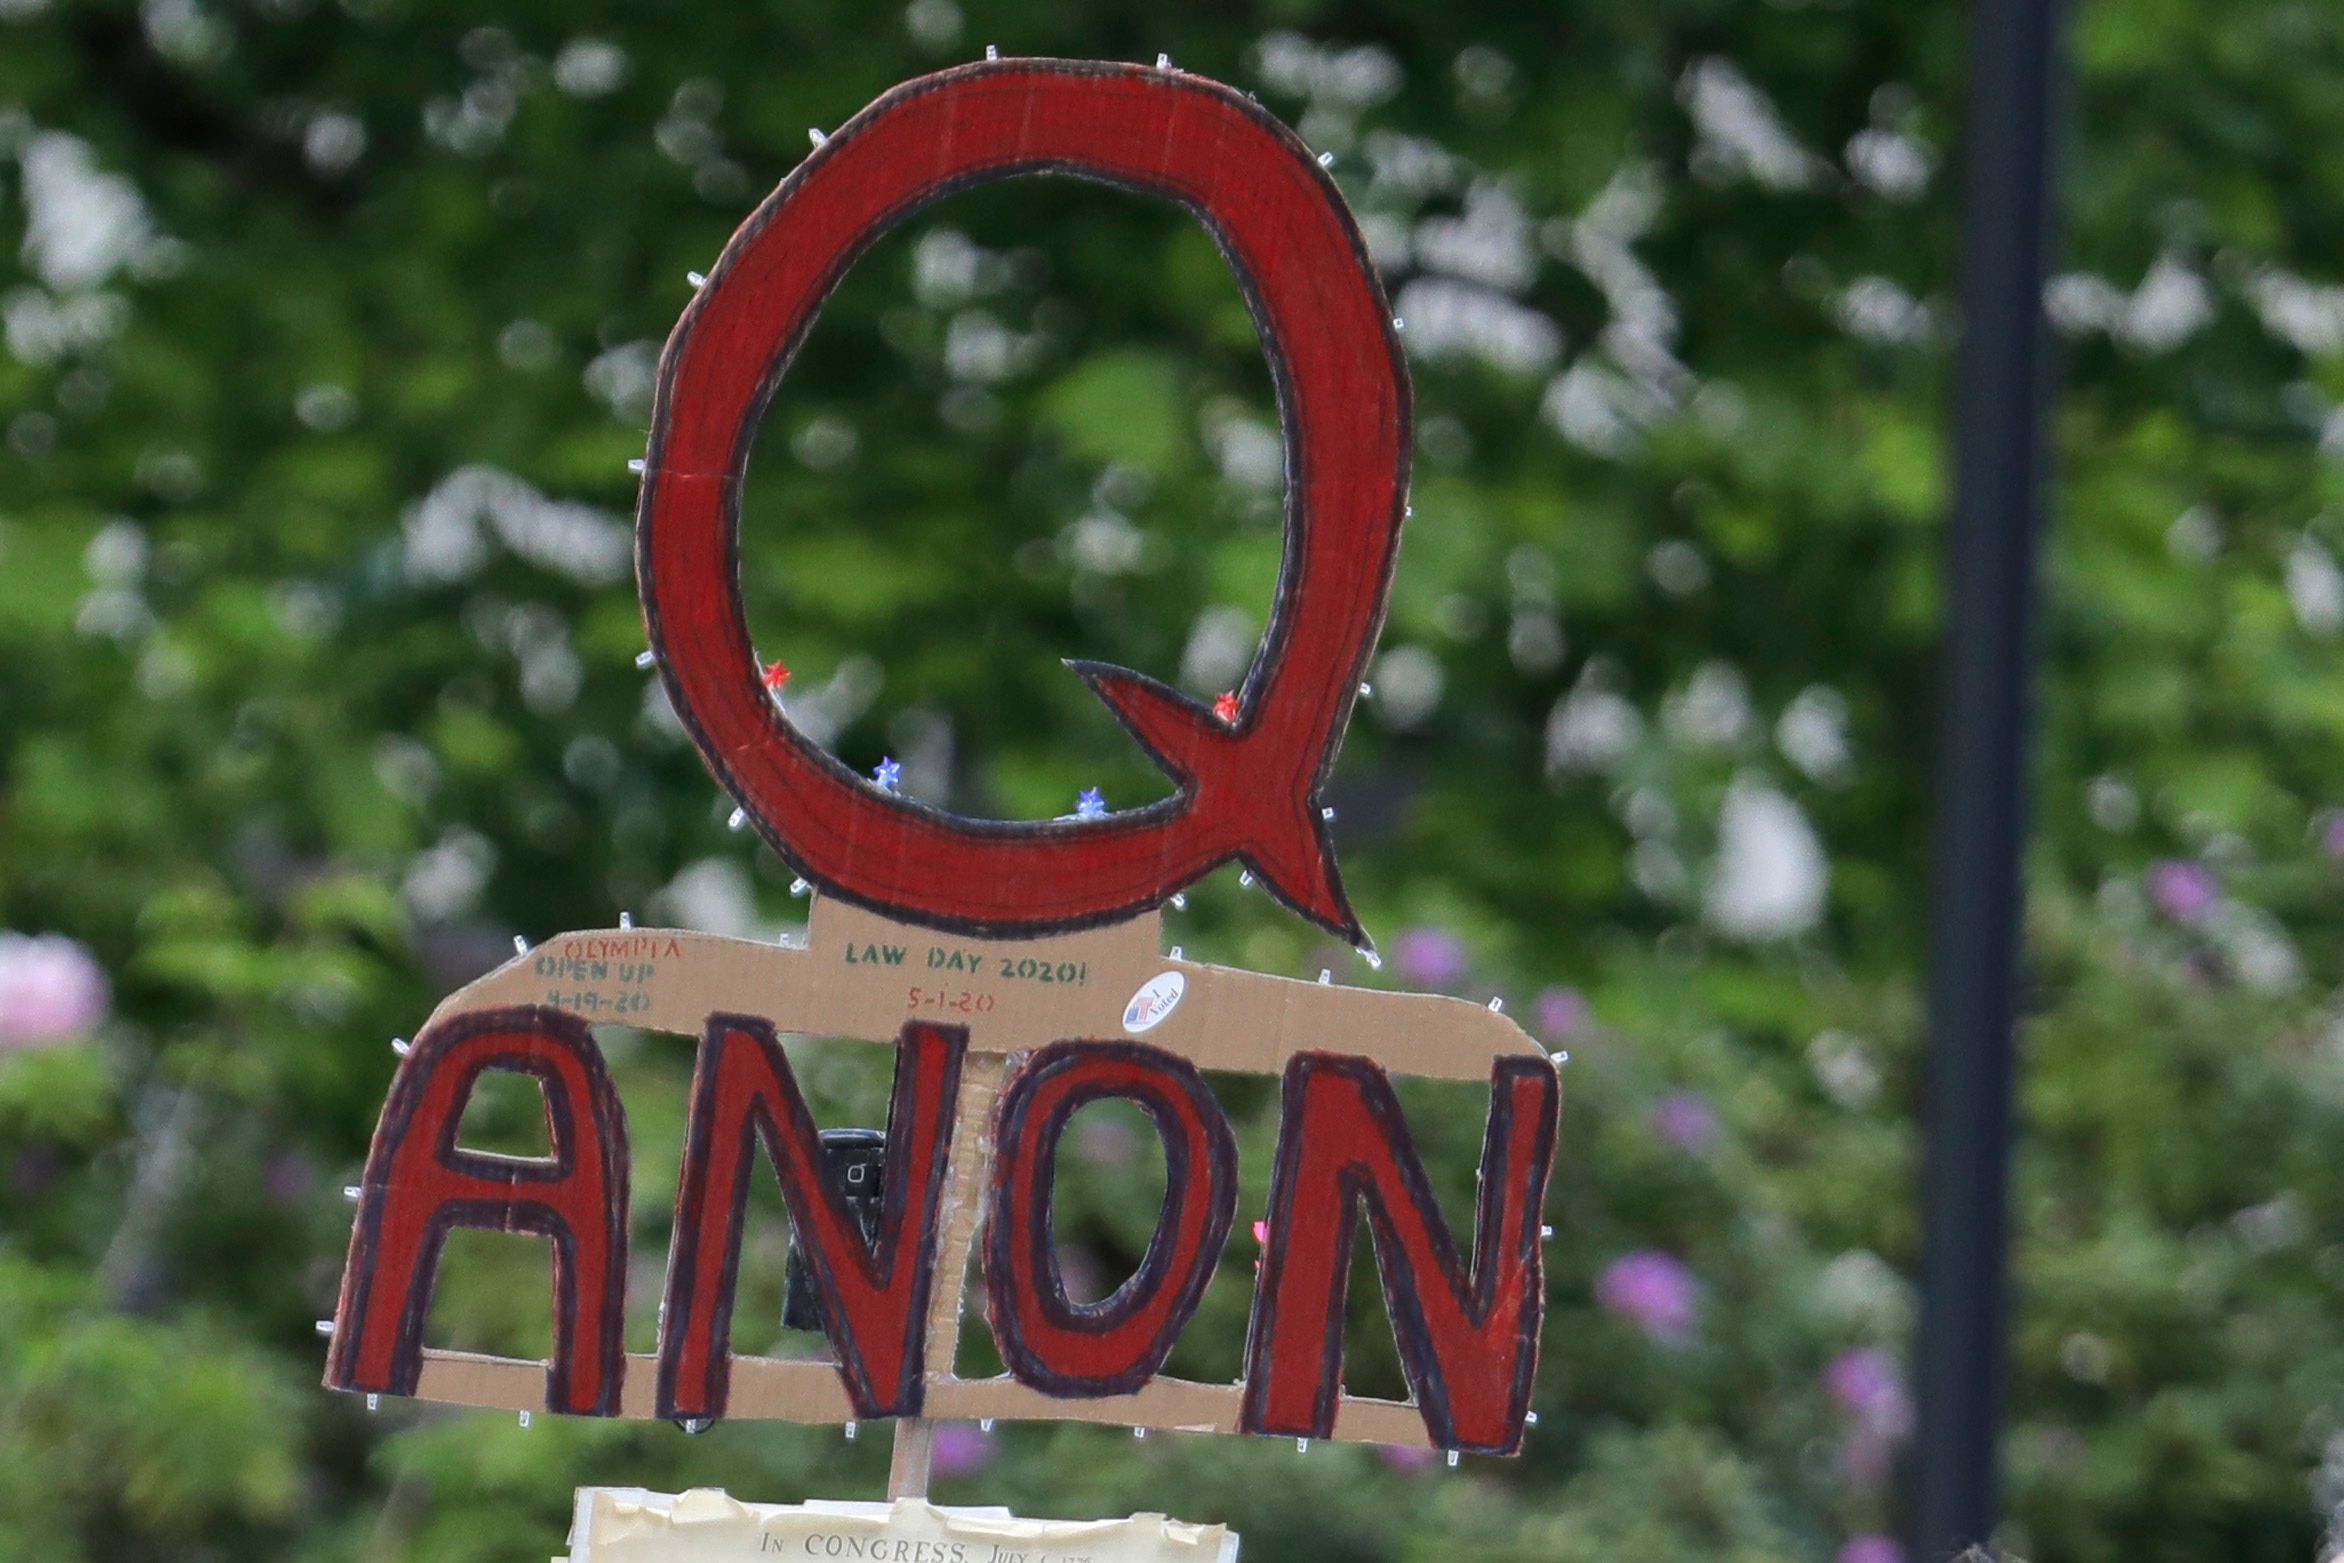 A person carries a sign promoting QAnon at a protest rally in Olympia, Washington, May 2020.